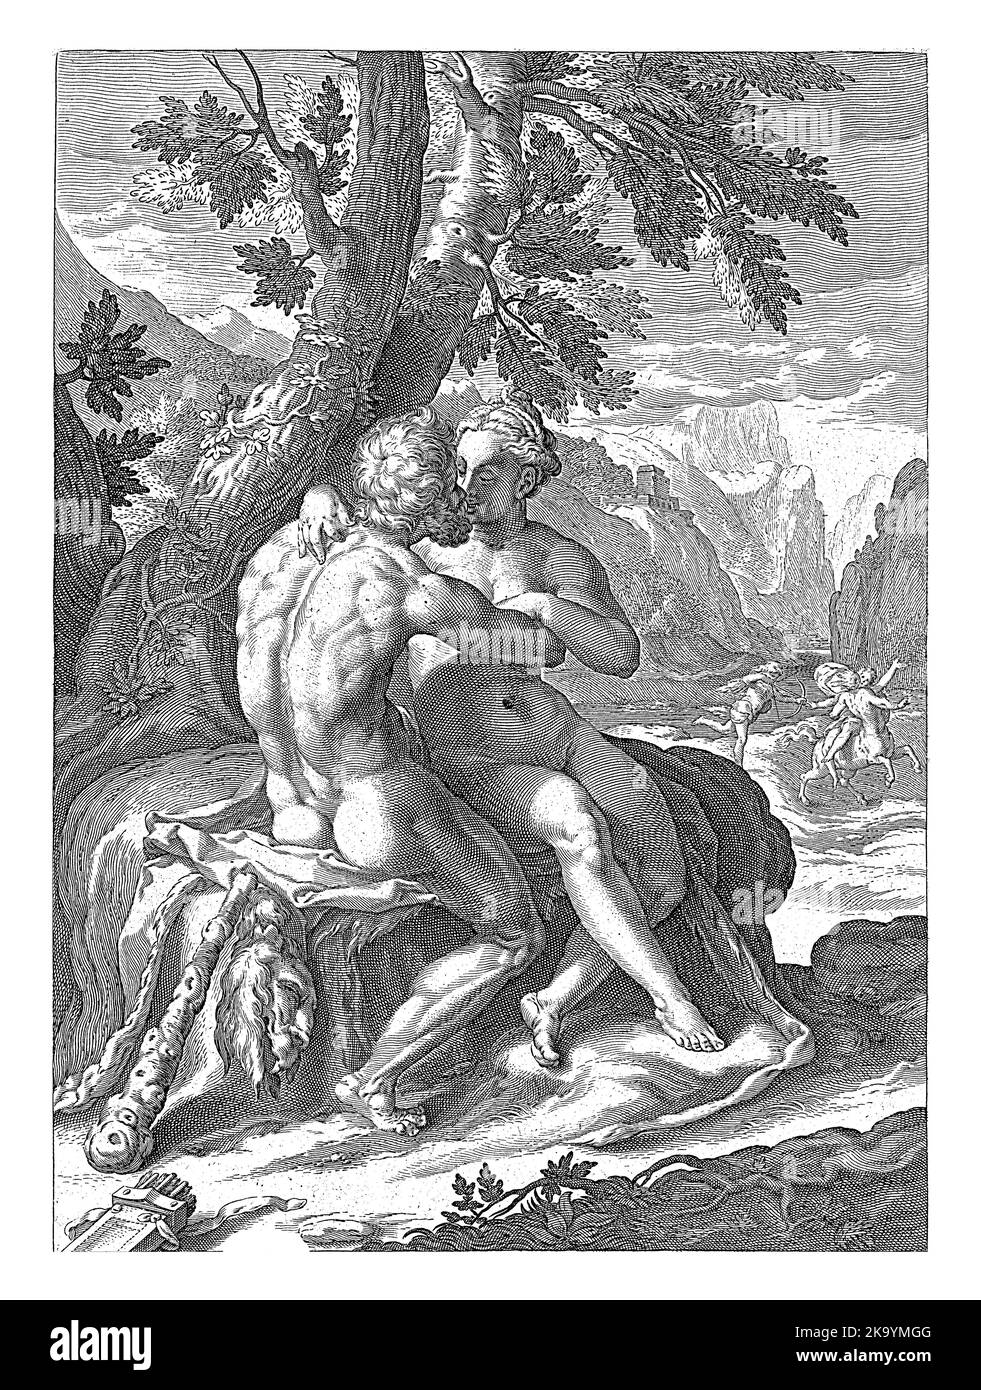 Hercules and Deianira in an amorous embrace in a landscape. Next to Hercules are his club and lion skin. In the background, Hercules kills the centaur Stock Photo